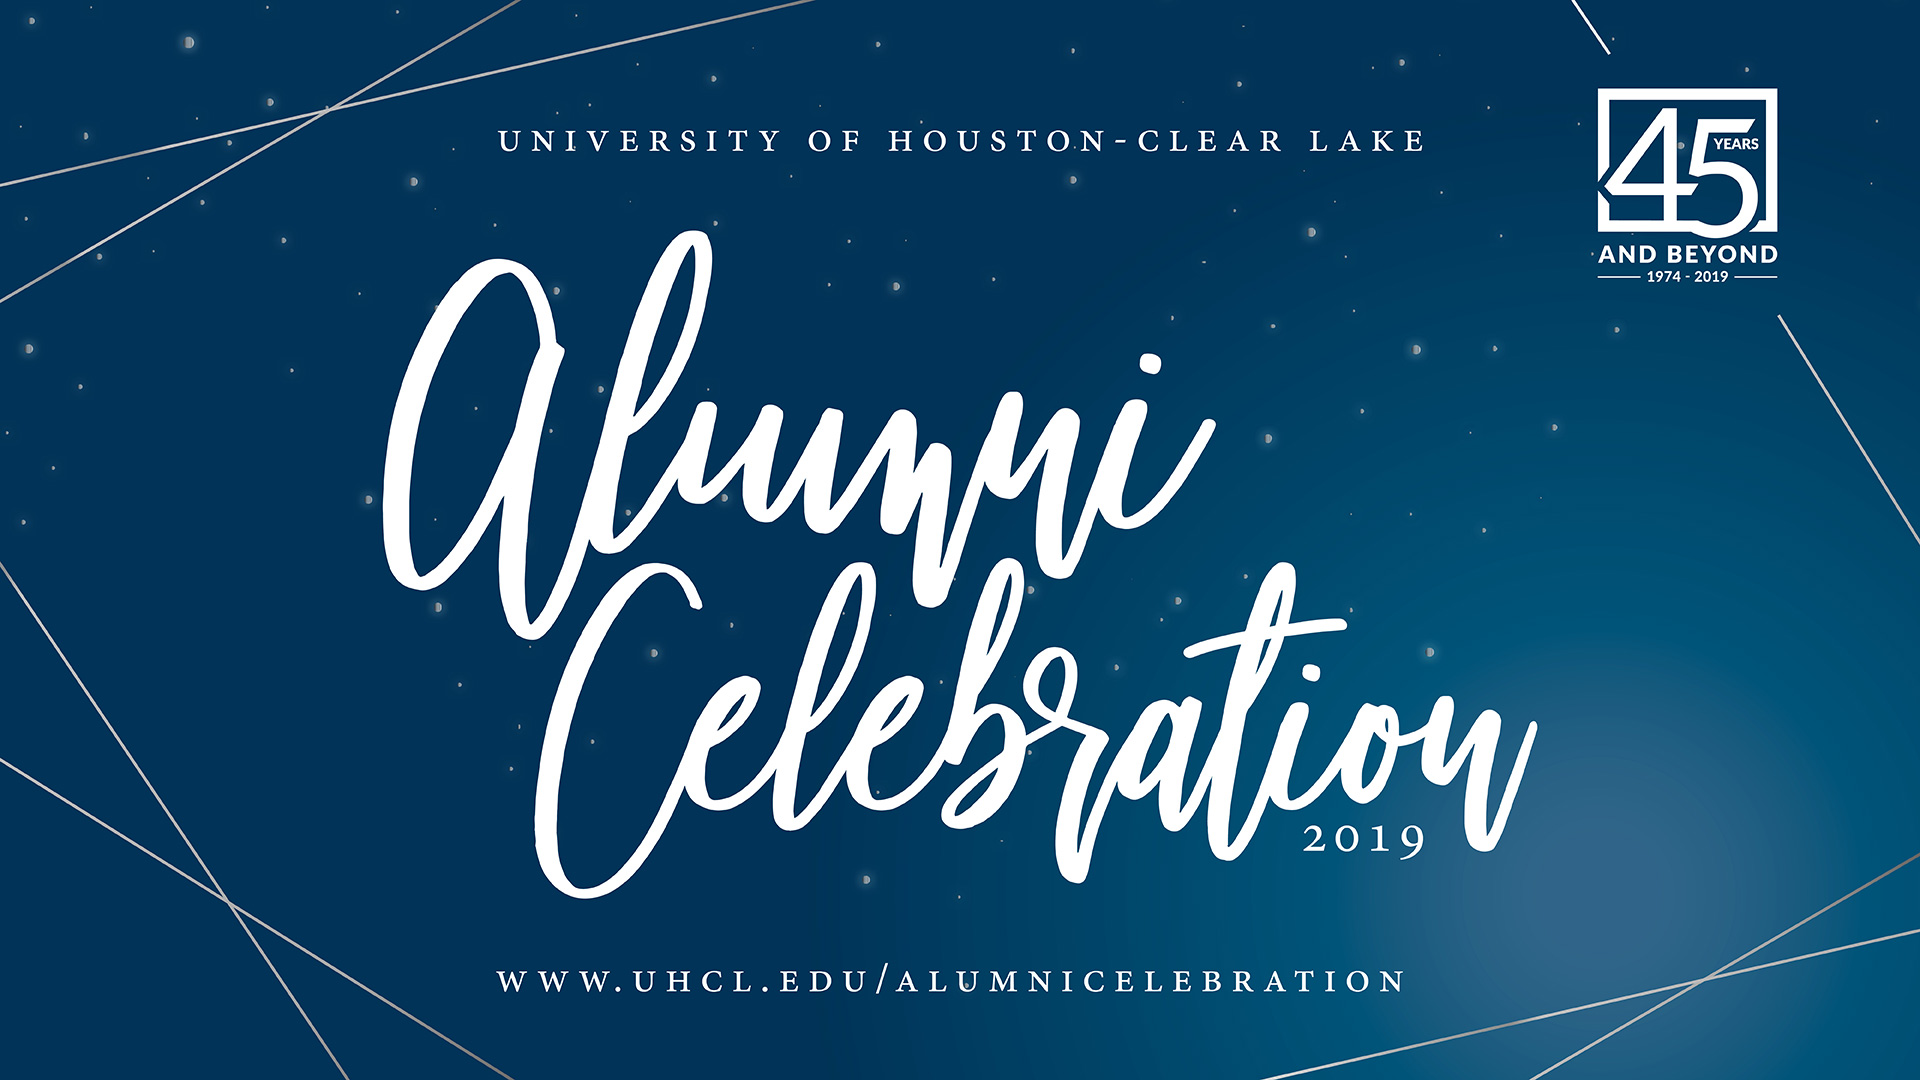 UHCL to honor outstanding alumni and professor at awards celebration